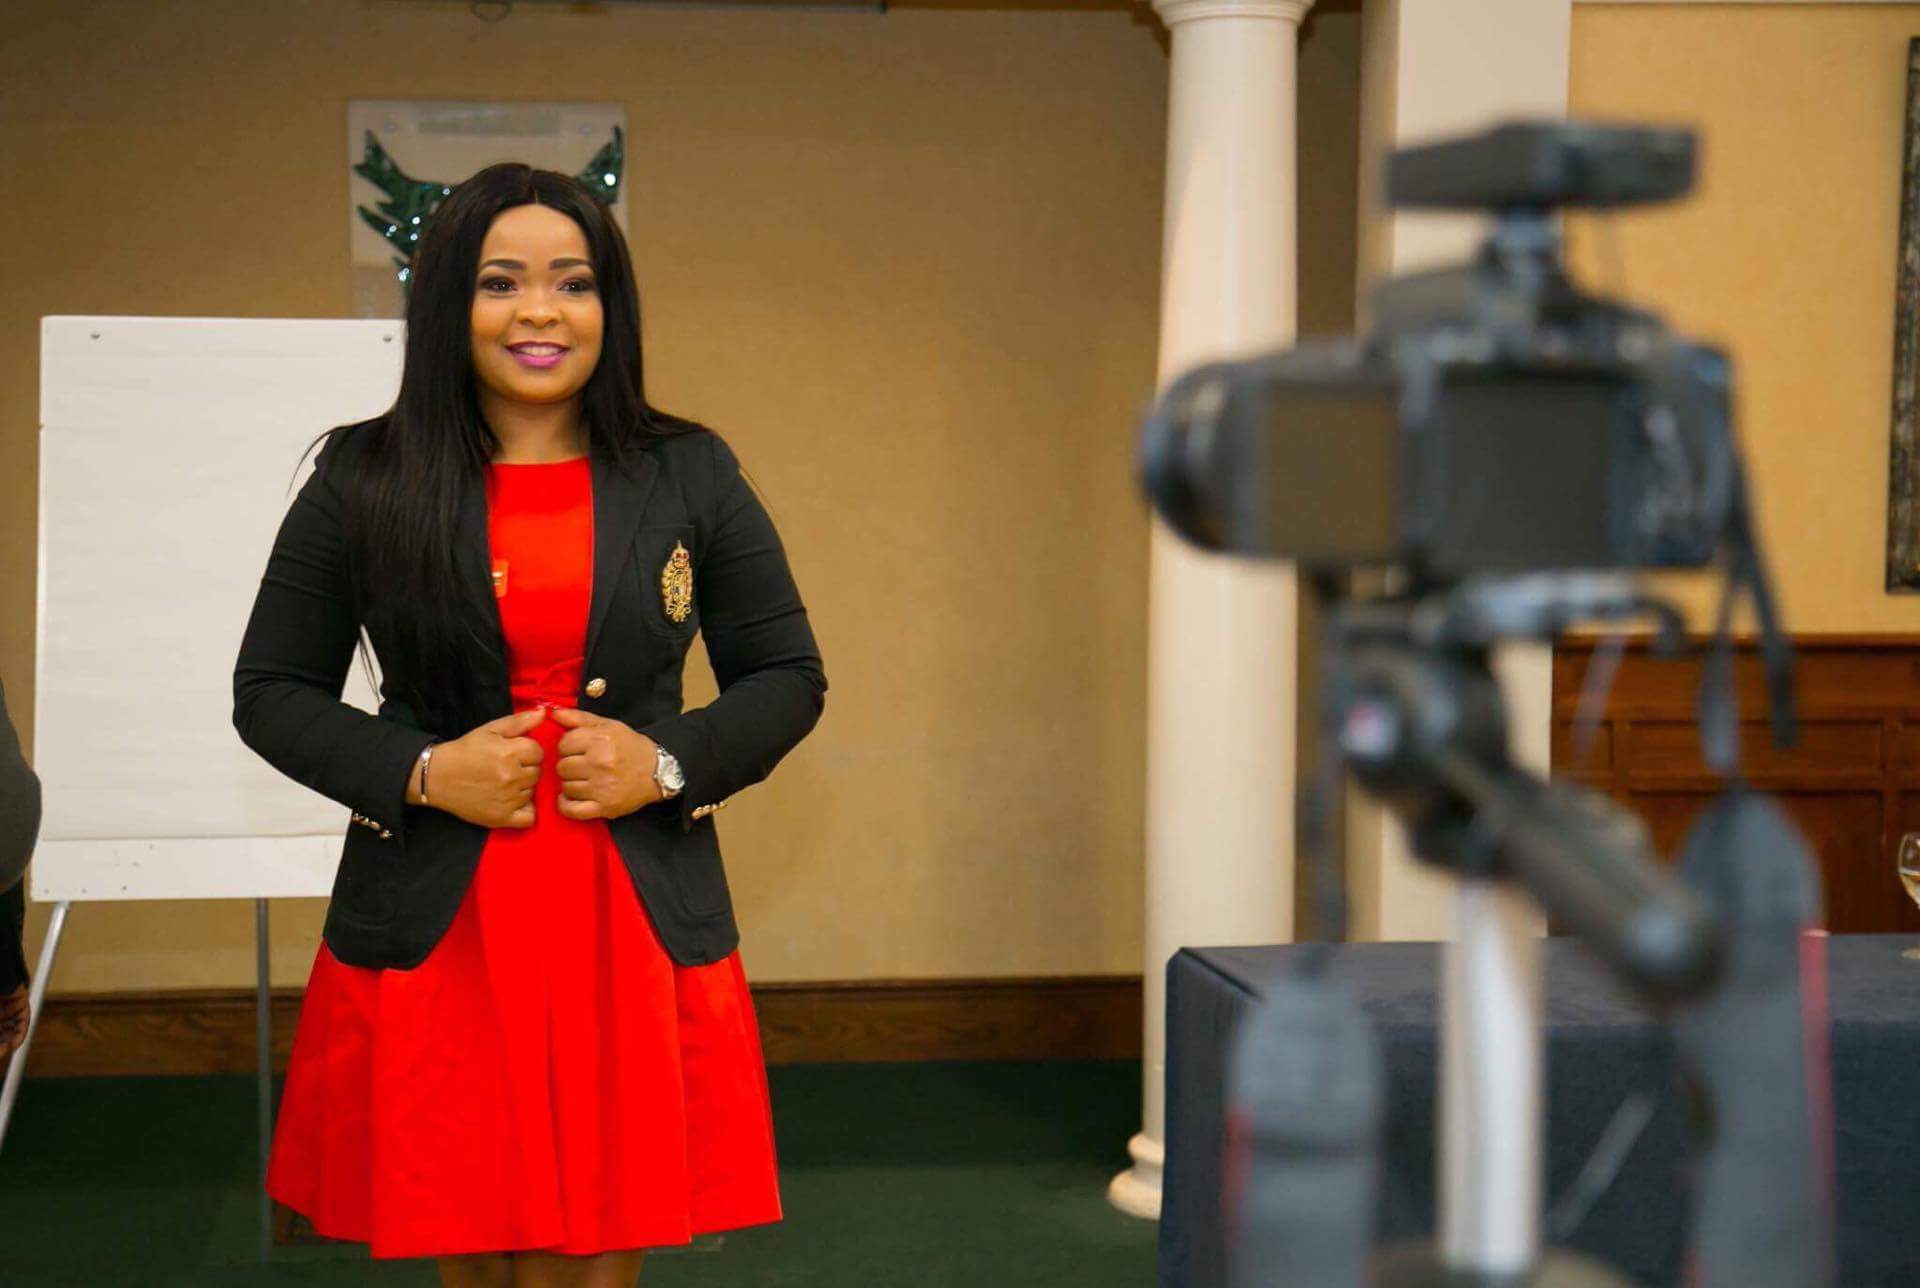 Harifa Daly The Lady Who Went From A Tomato Seller To A Motivational Speaker Tv Host